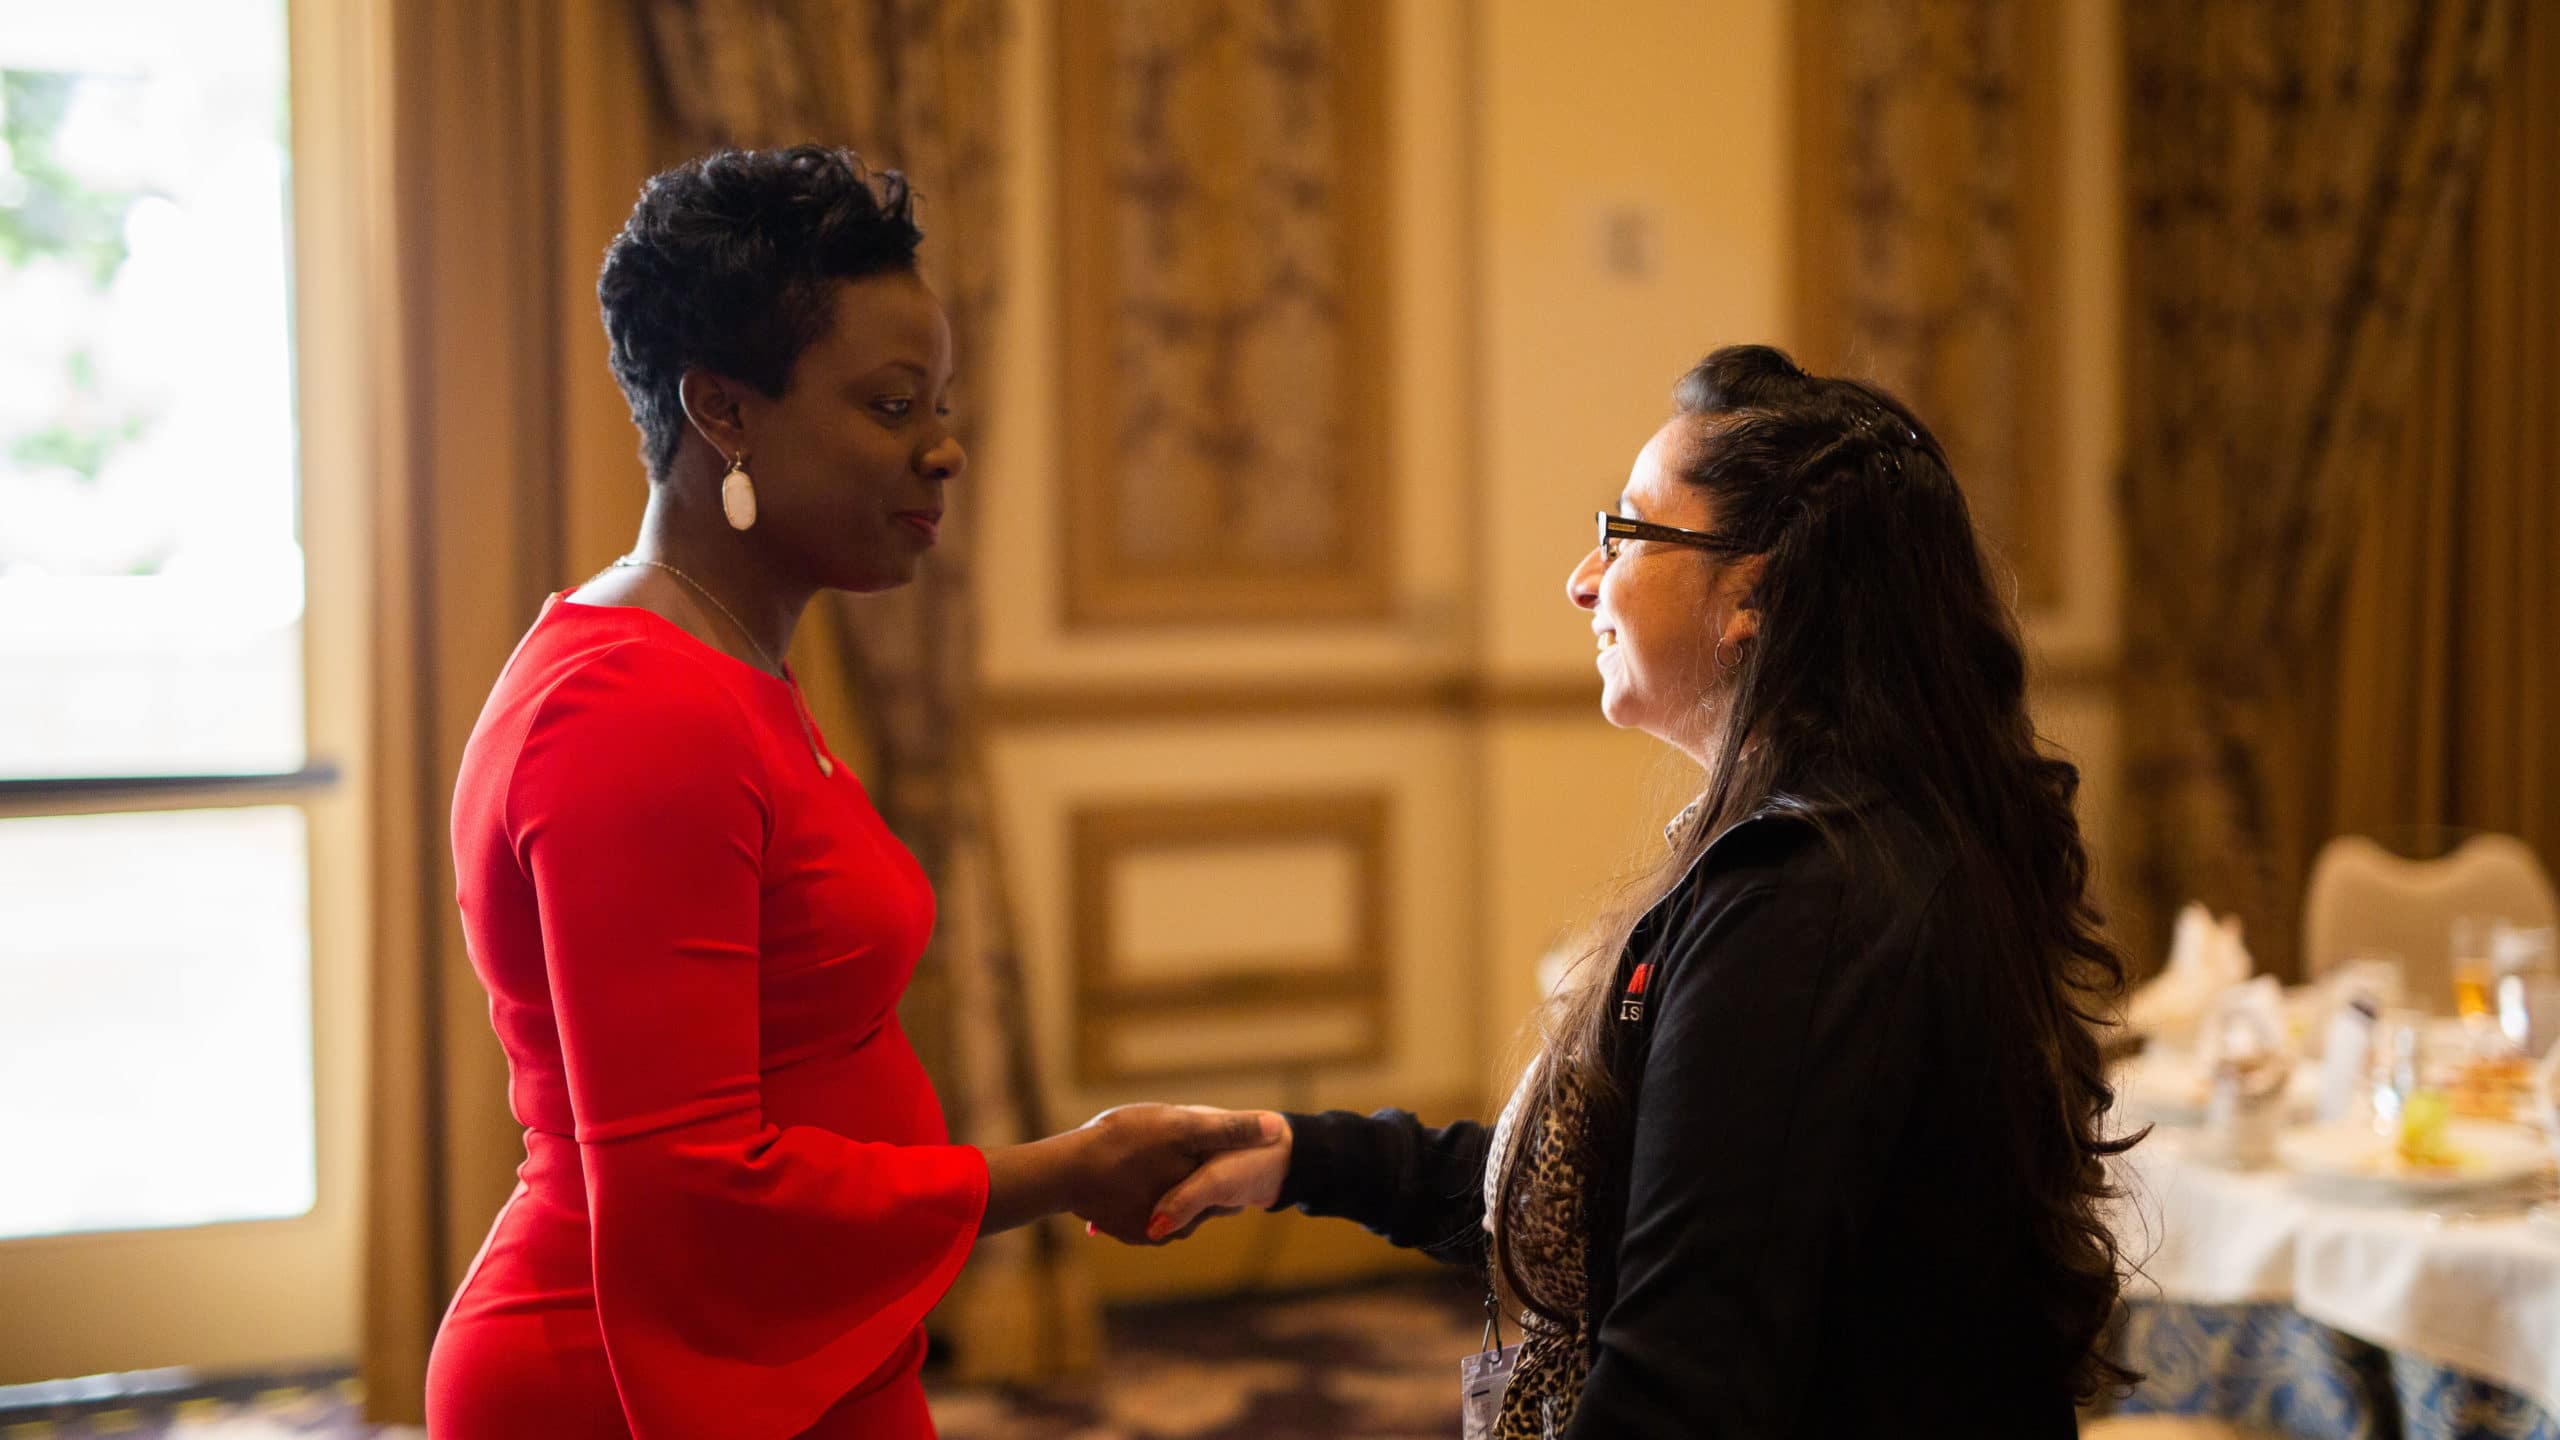 Renee Horne, vice president of consumer lending experiences, meets with an attendee at the 2019 Auto Finance Summit after her presentation at the Women in Auto Finance Luncheon